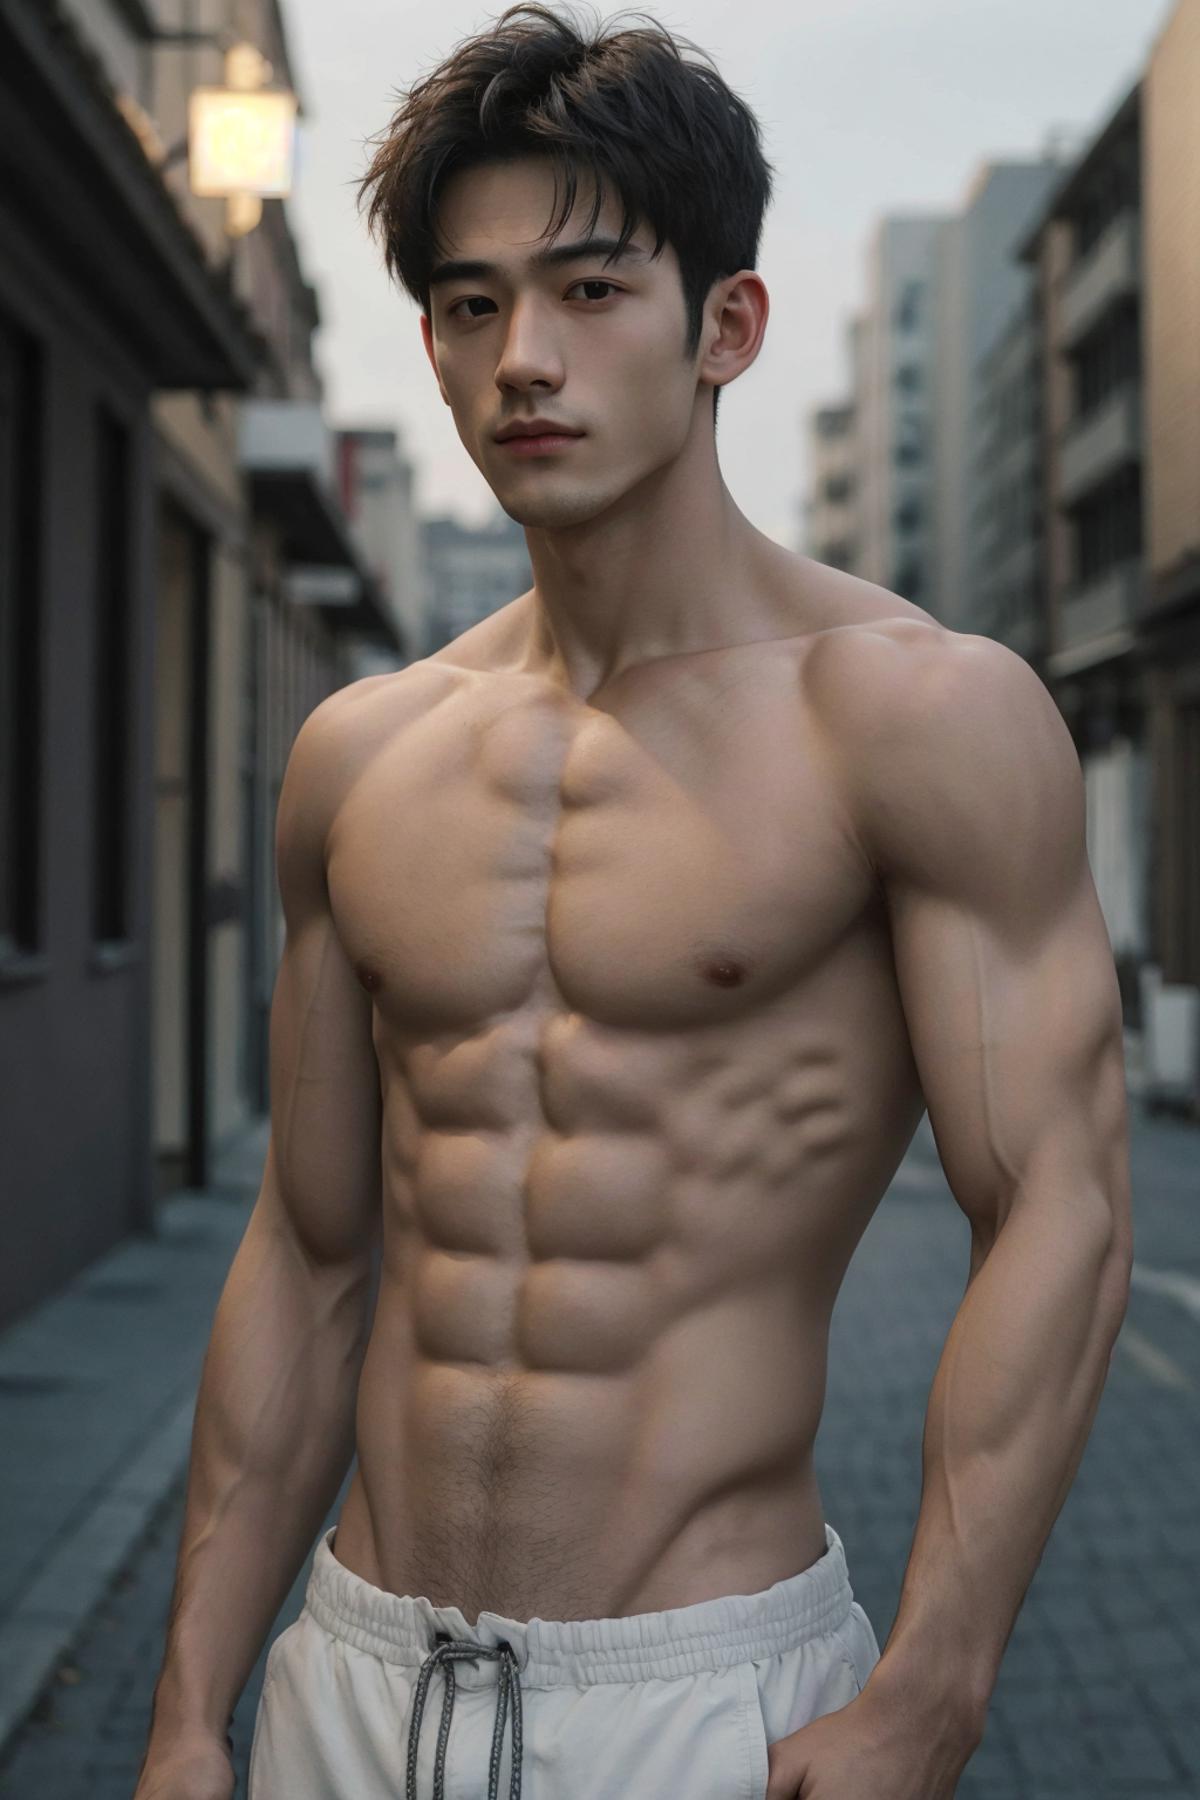 A shirtless man with a six pack standing on a sidewalk.